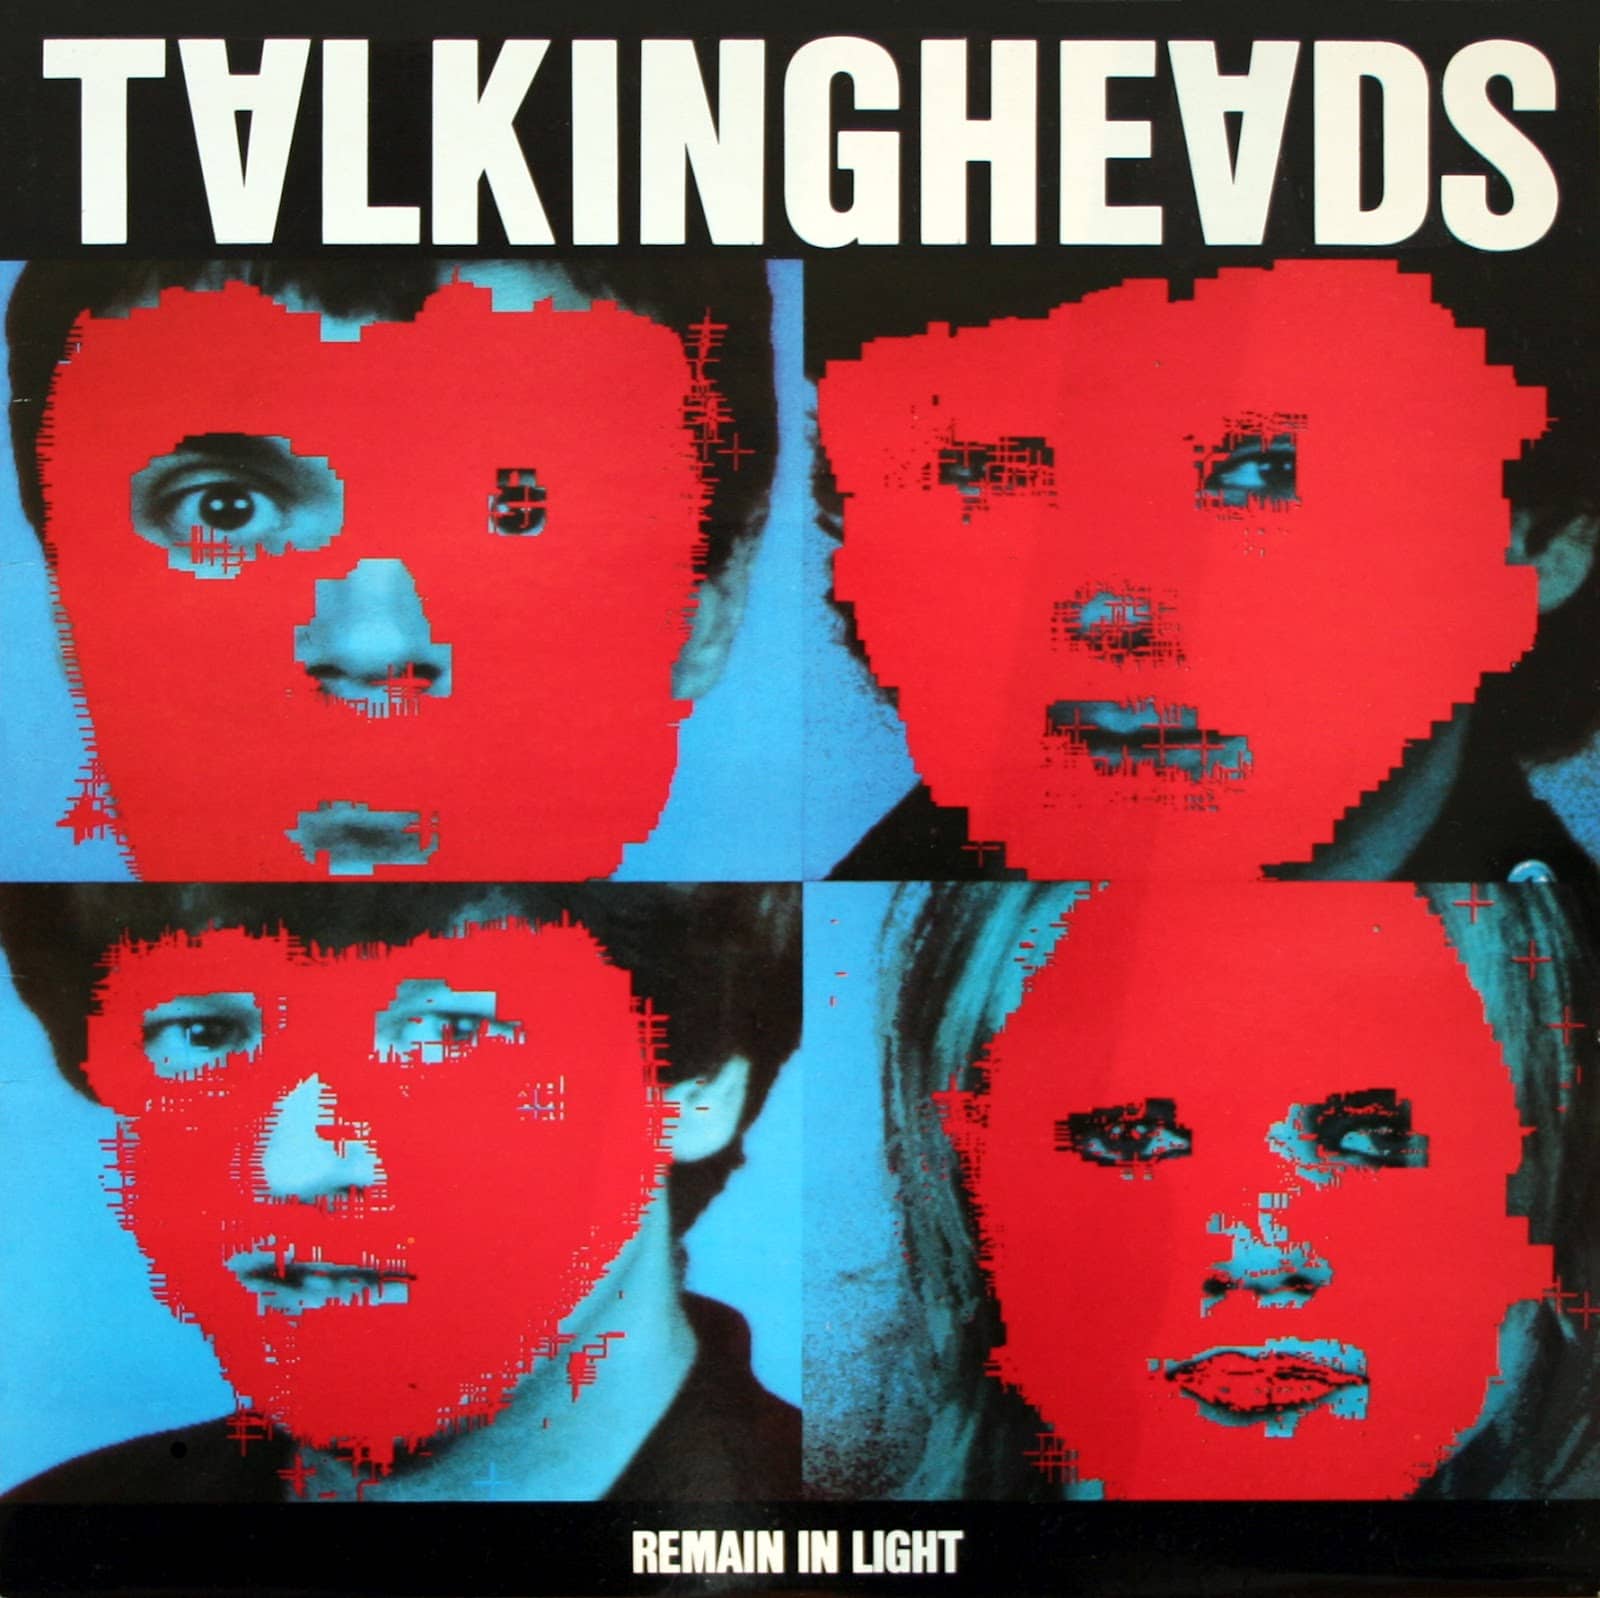 Thumbnail for Episode 181: Talking Heads: ‘Remain in Light’